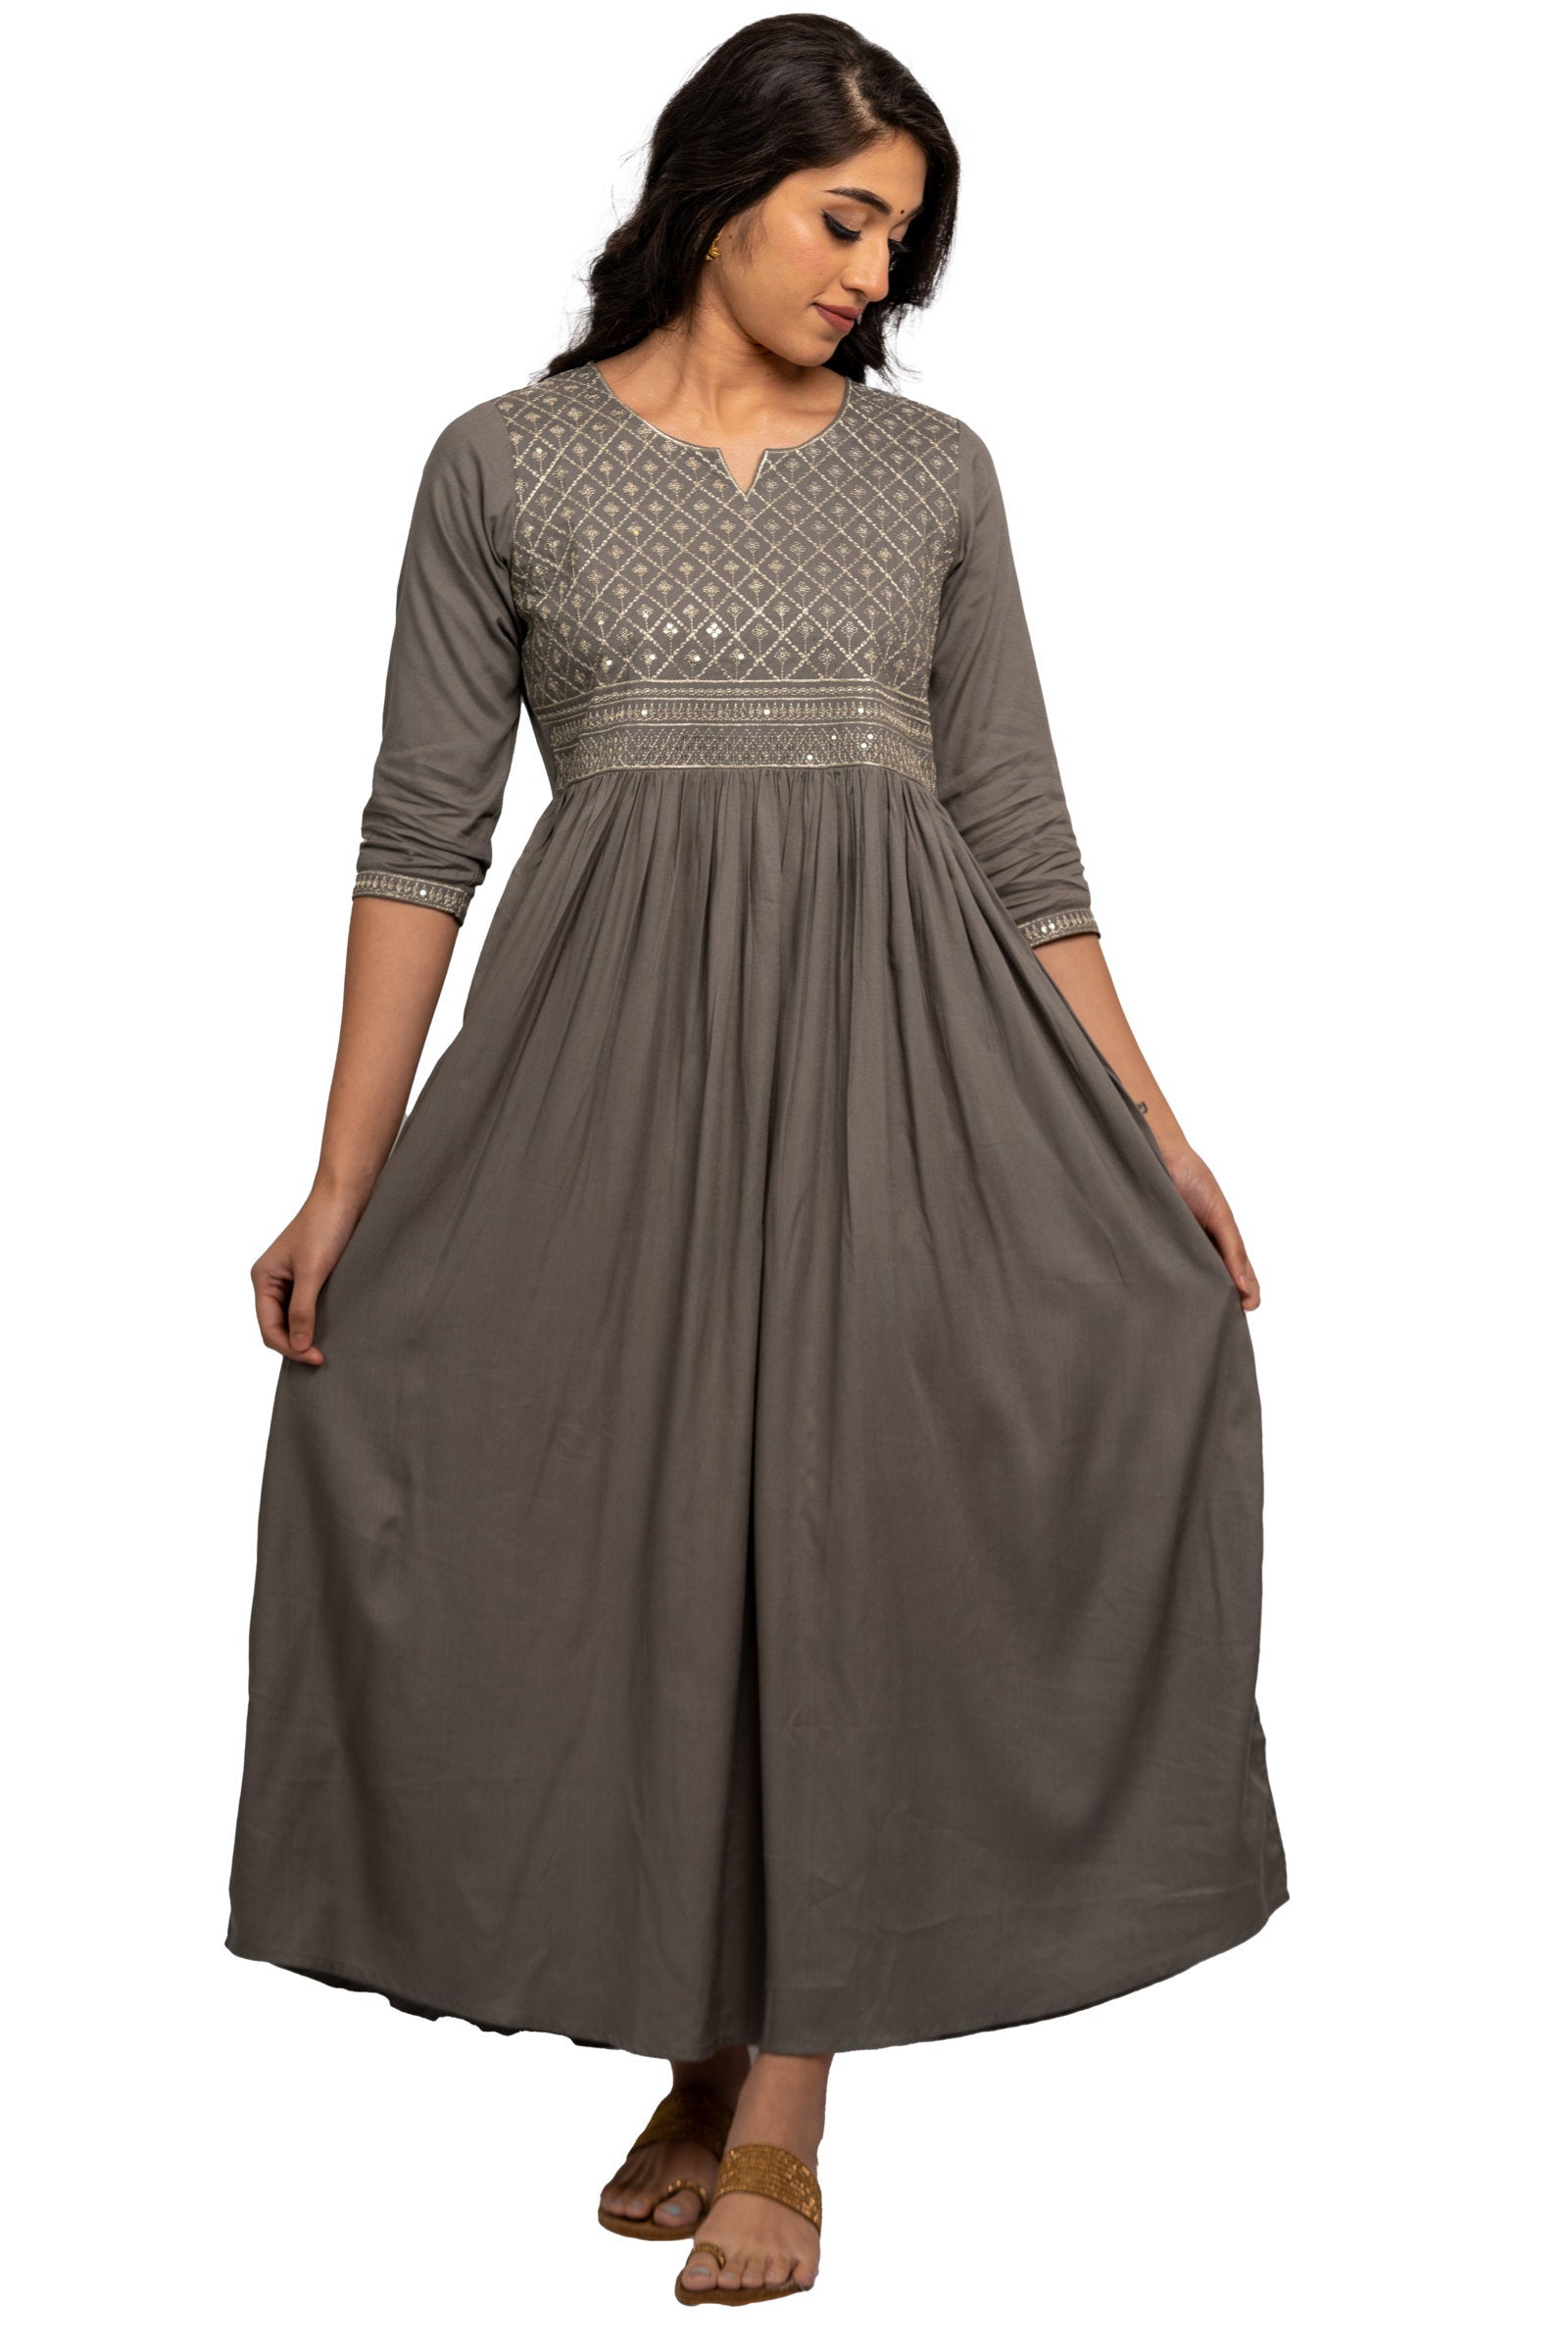 Full Gown - Grey full gown with rich silver embroidery in the front and gather detail. 3/4th Sleeve with matching embroidery at the tip. Round neck with V cut. Flared hemline deriving from the gather detail. Rayon material.